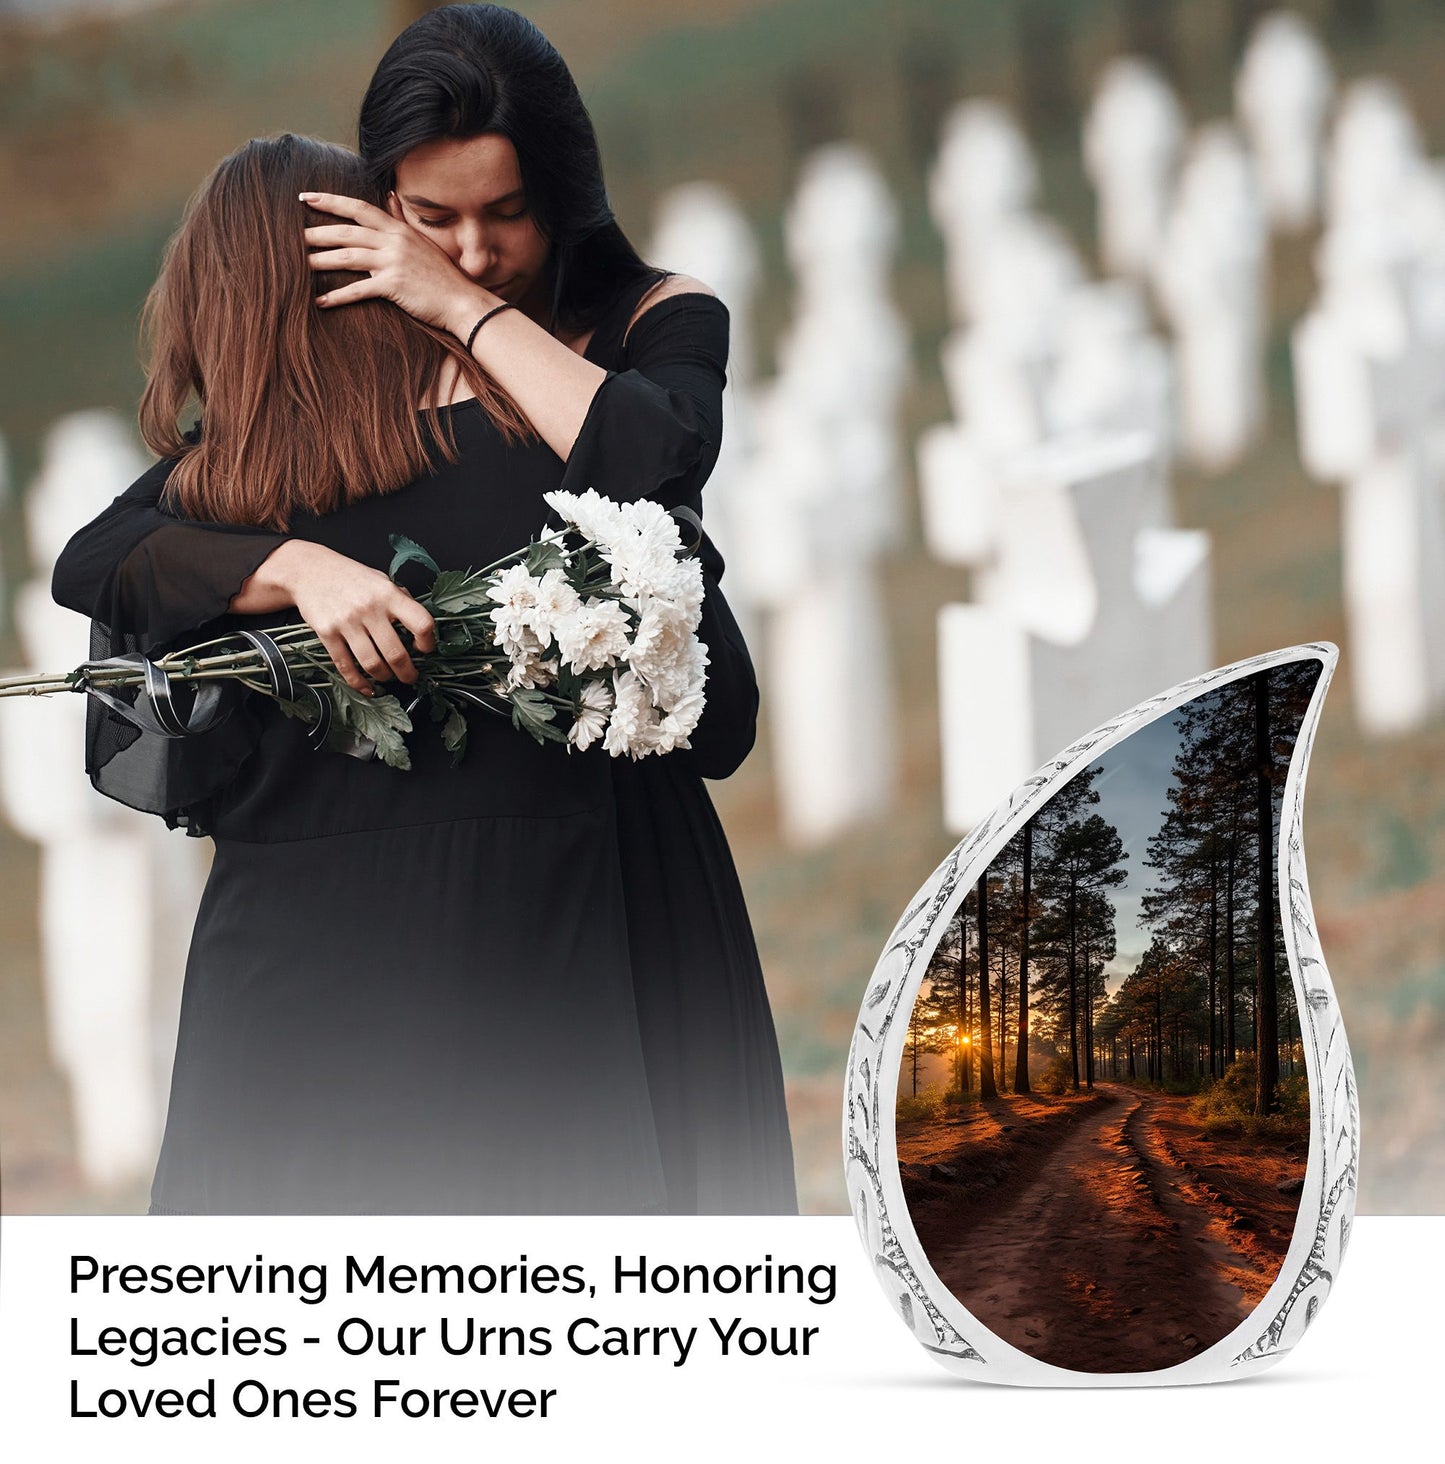 Large Dawn Whispers cremation urn, a sophisticated choice for men looking to honor the ashes of their beloved